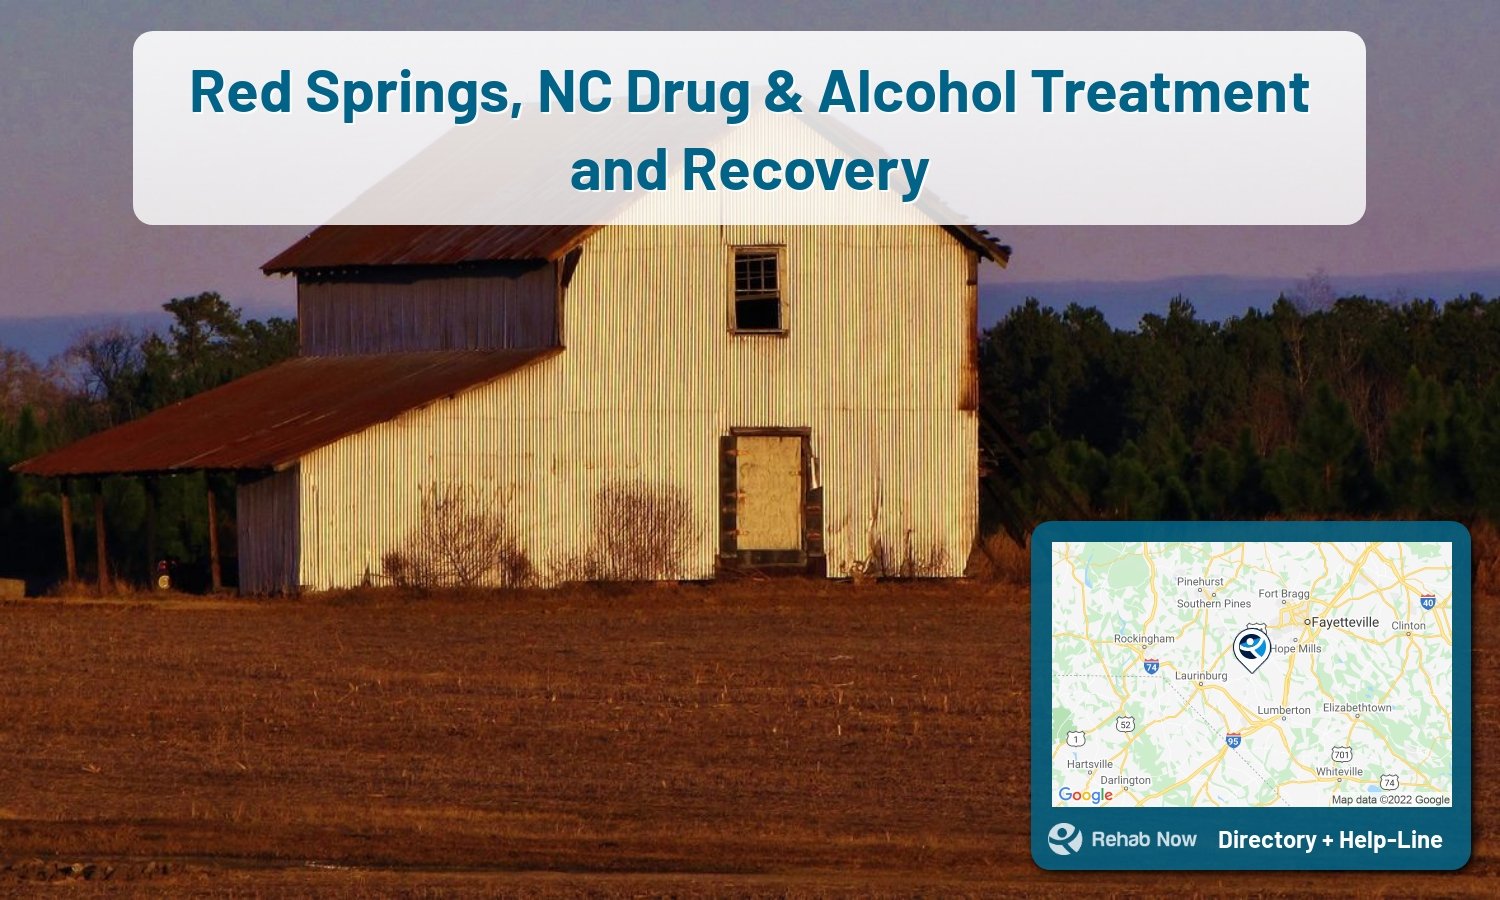 Let our expert counselors help find the best addiction treatment in Red Springs, North Carolina now with a free call to our hotline.